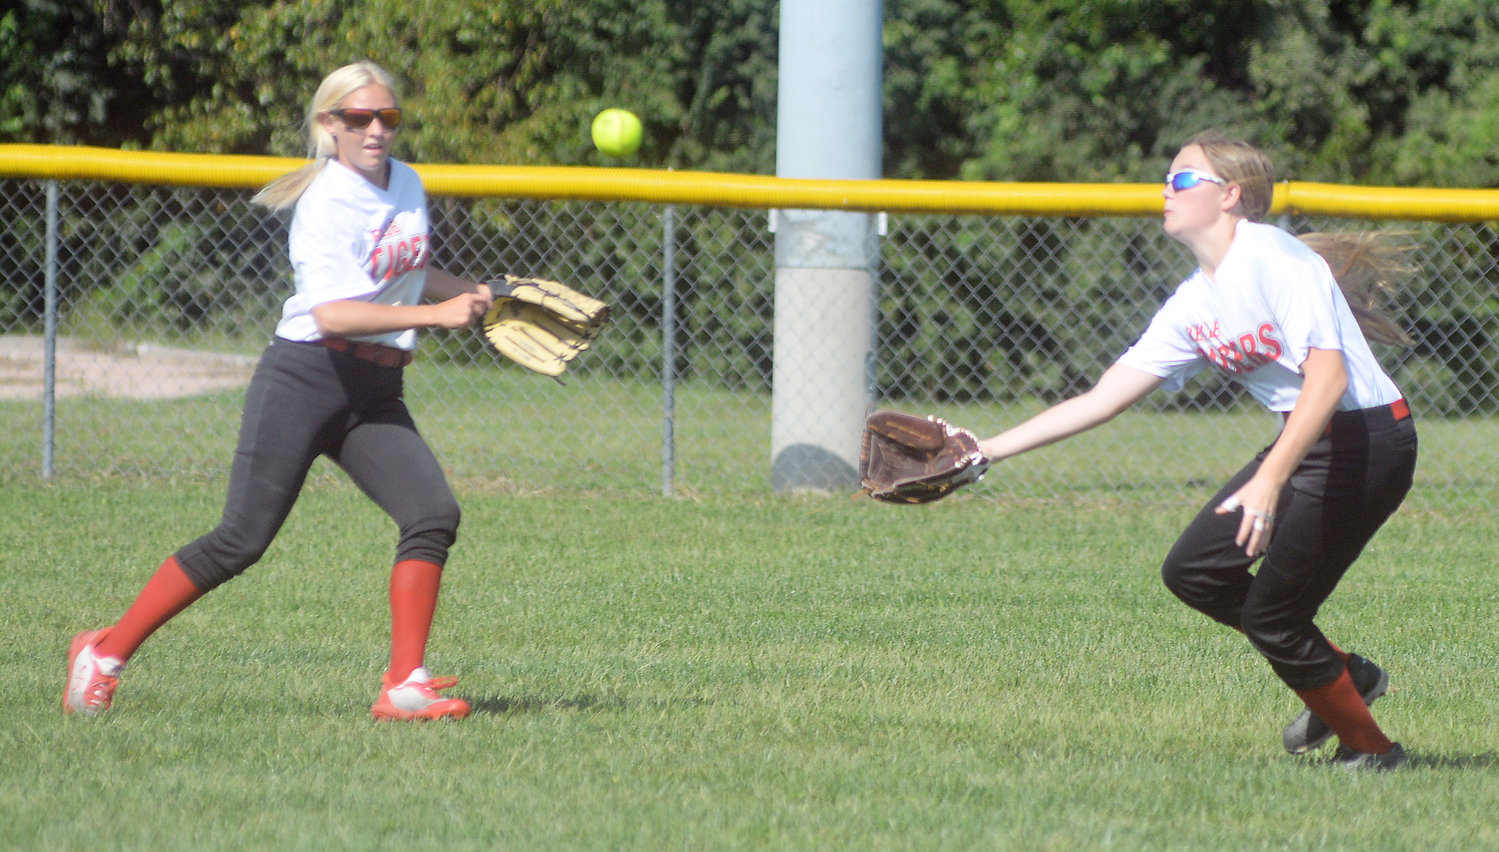 Tajel McDaniel (right) watches a sinking line drive fall into her glove while fellow Belle Lady Tiger outfielder Ileana Sullinger gets ready to back the play up in the outfield.